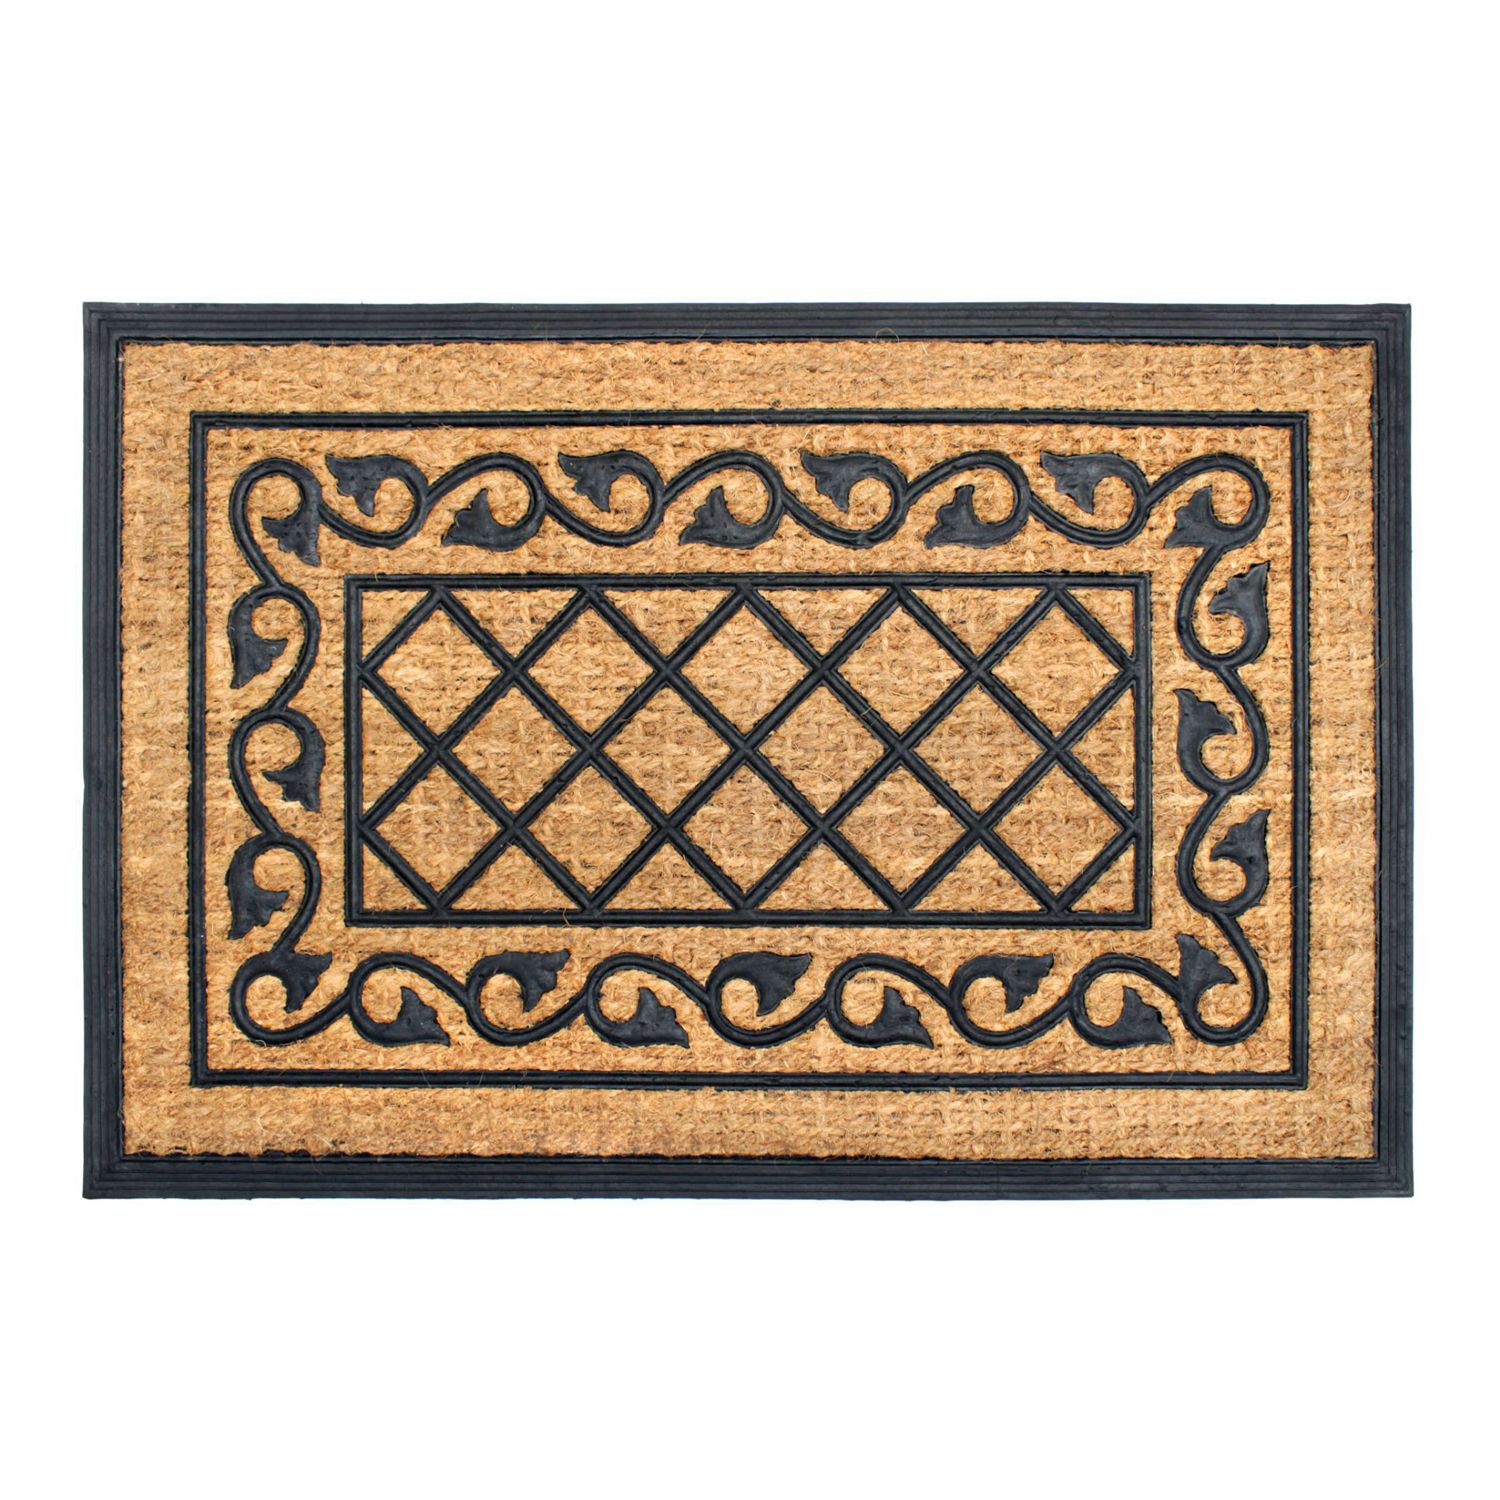 Plain Coco Coir Door Mat, Bare Natural Unadorned Doormat for Outdoor  Entries, Suitable for Inside and Outside Use for Cleaning Men's and Women's  Sandals, Shoes, and Boots (30x17 in)